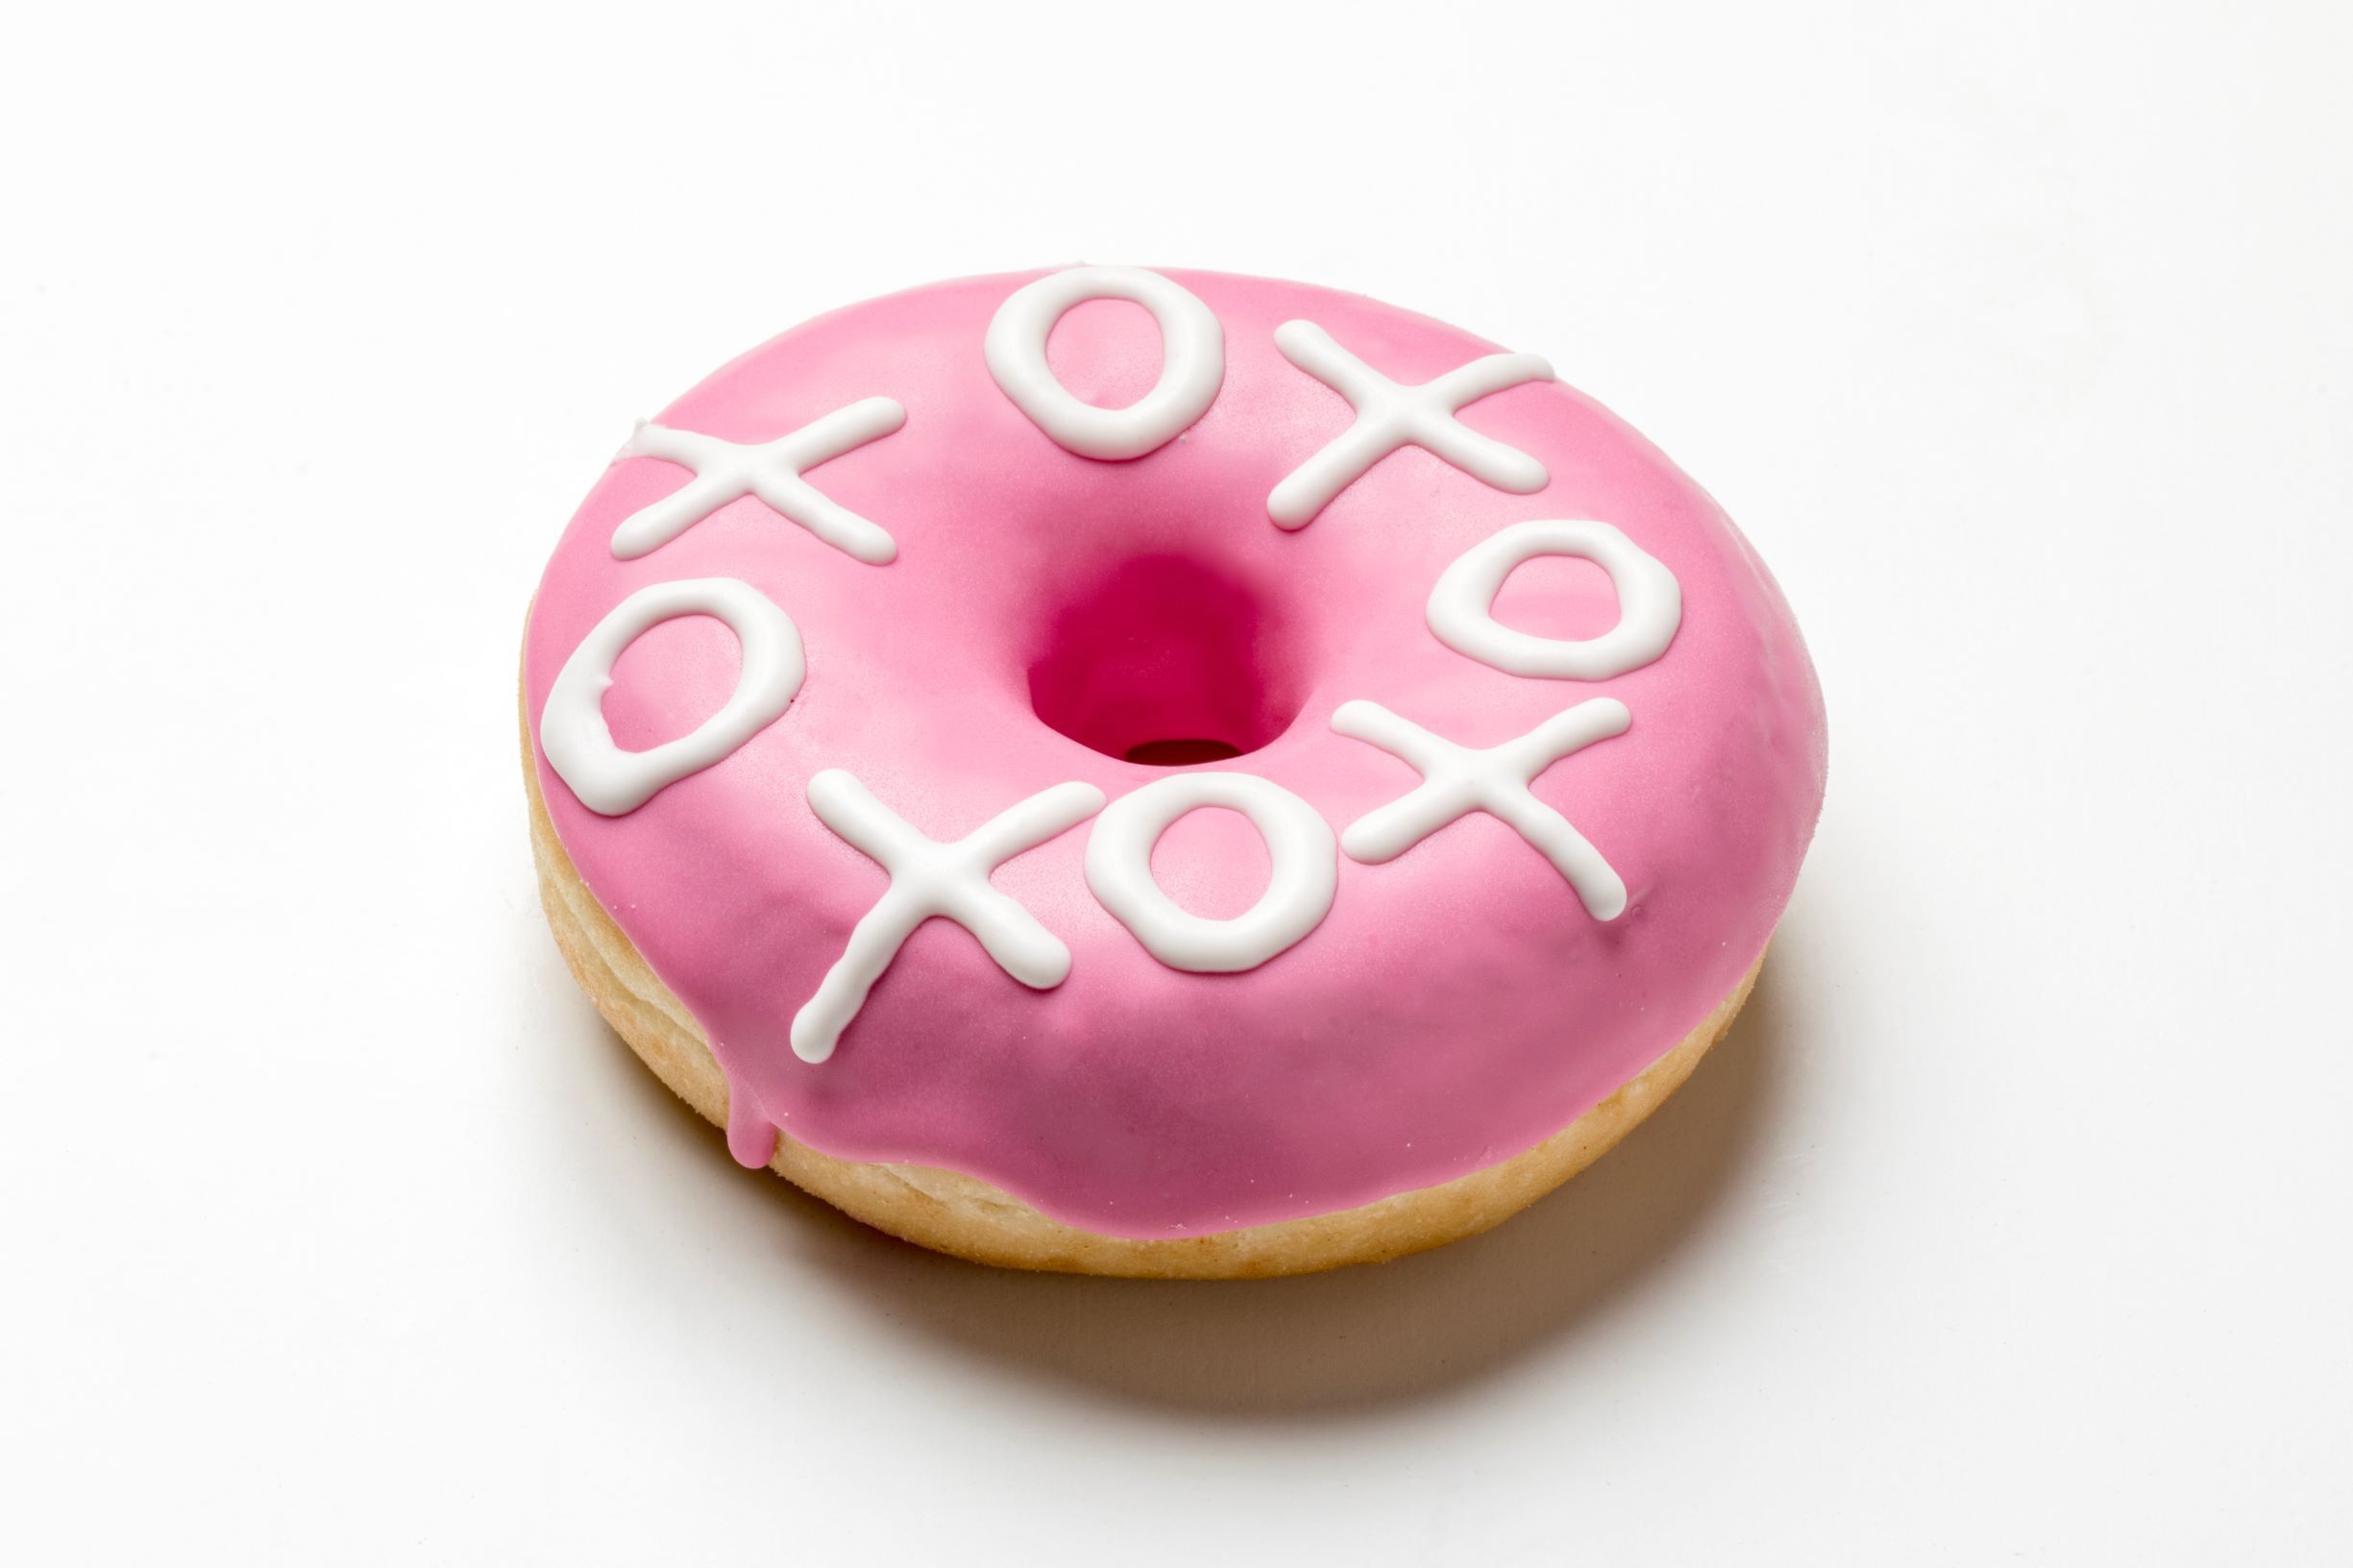 Donut enrobed in pink chocolate with tic-tac-toe printed on top in white chocolate by FoodJet chocolate depositor